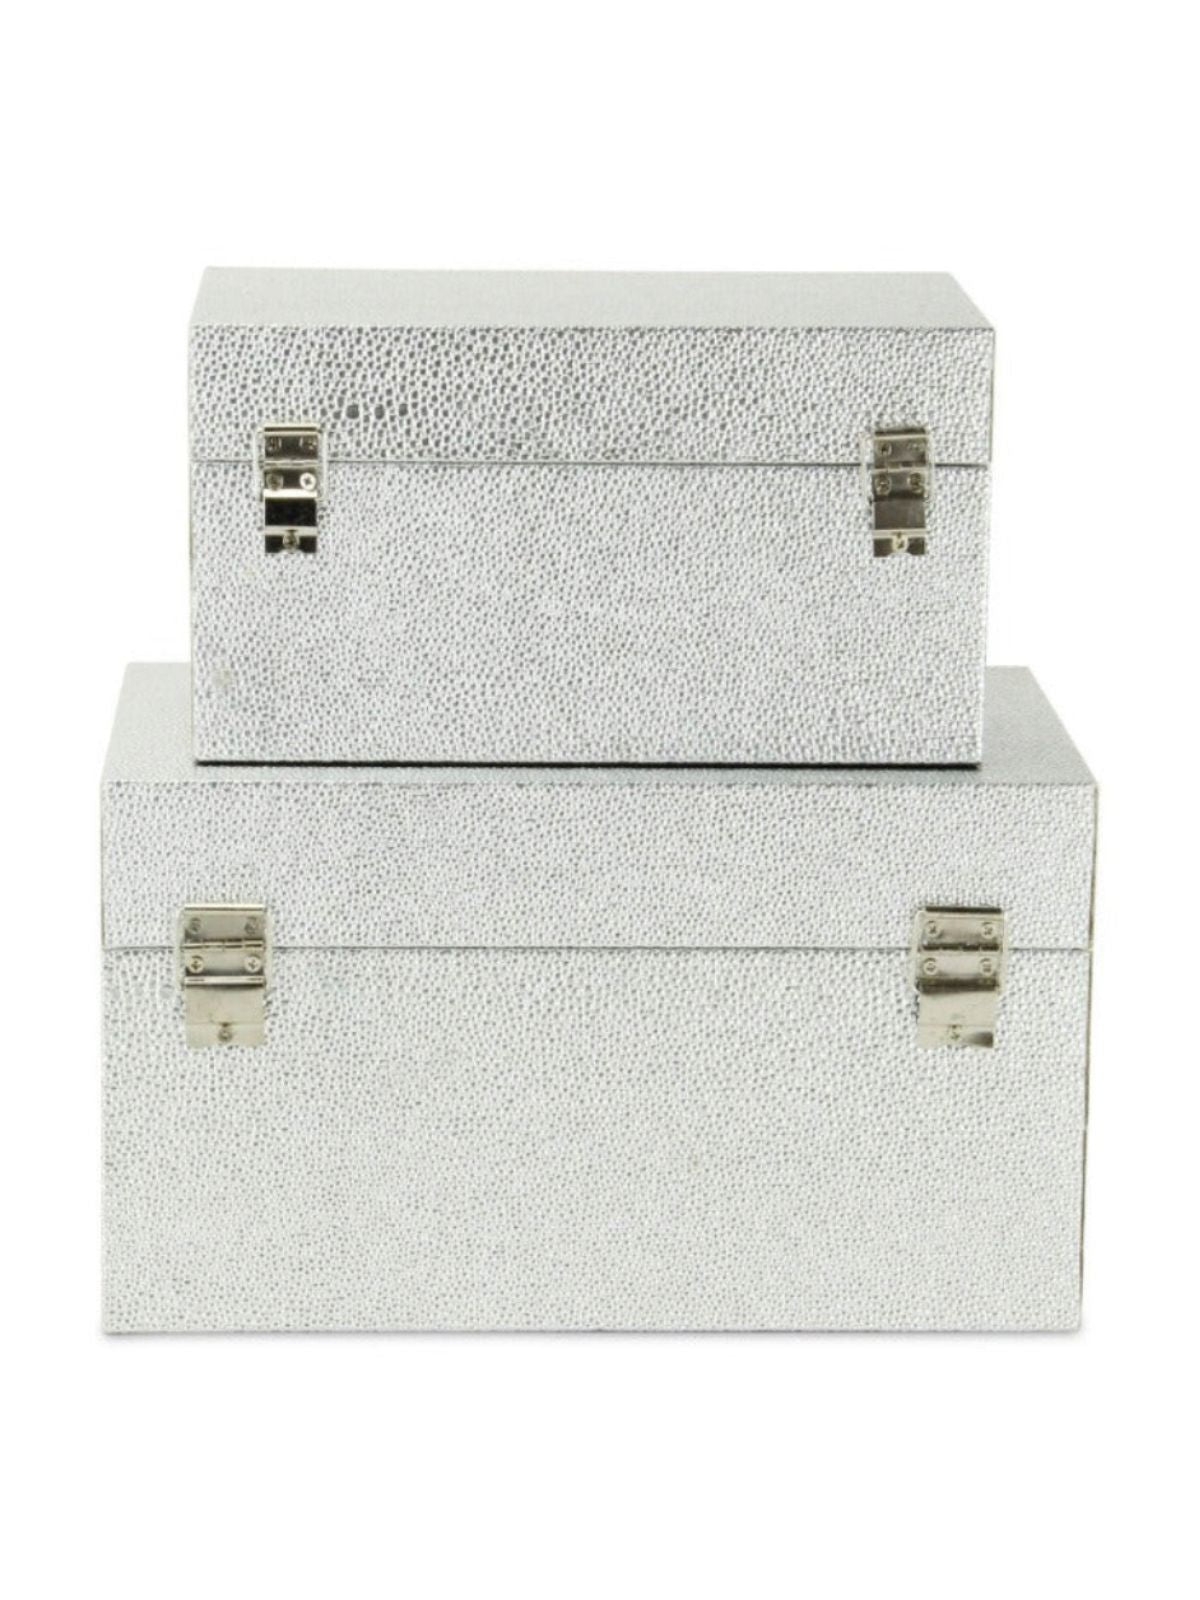 Keepsake boxes have provided a unique elegant touch to many spaces. Perfect for storing treasured items, they provide an eye-catching and warm look. The Doppia Felicita Box Set features a silver shagreen body with a Happiness symbolic front handle!